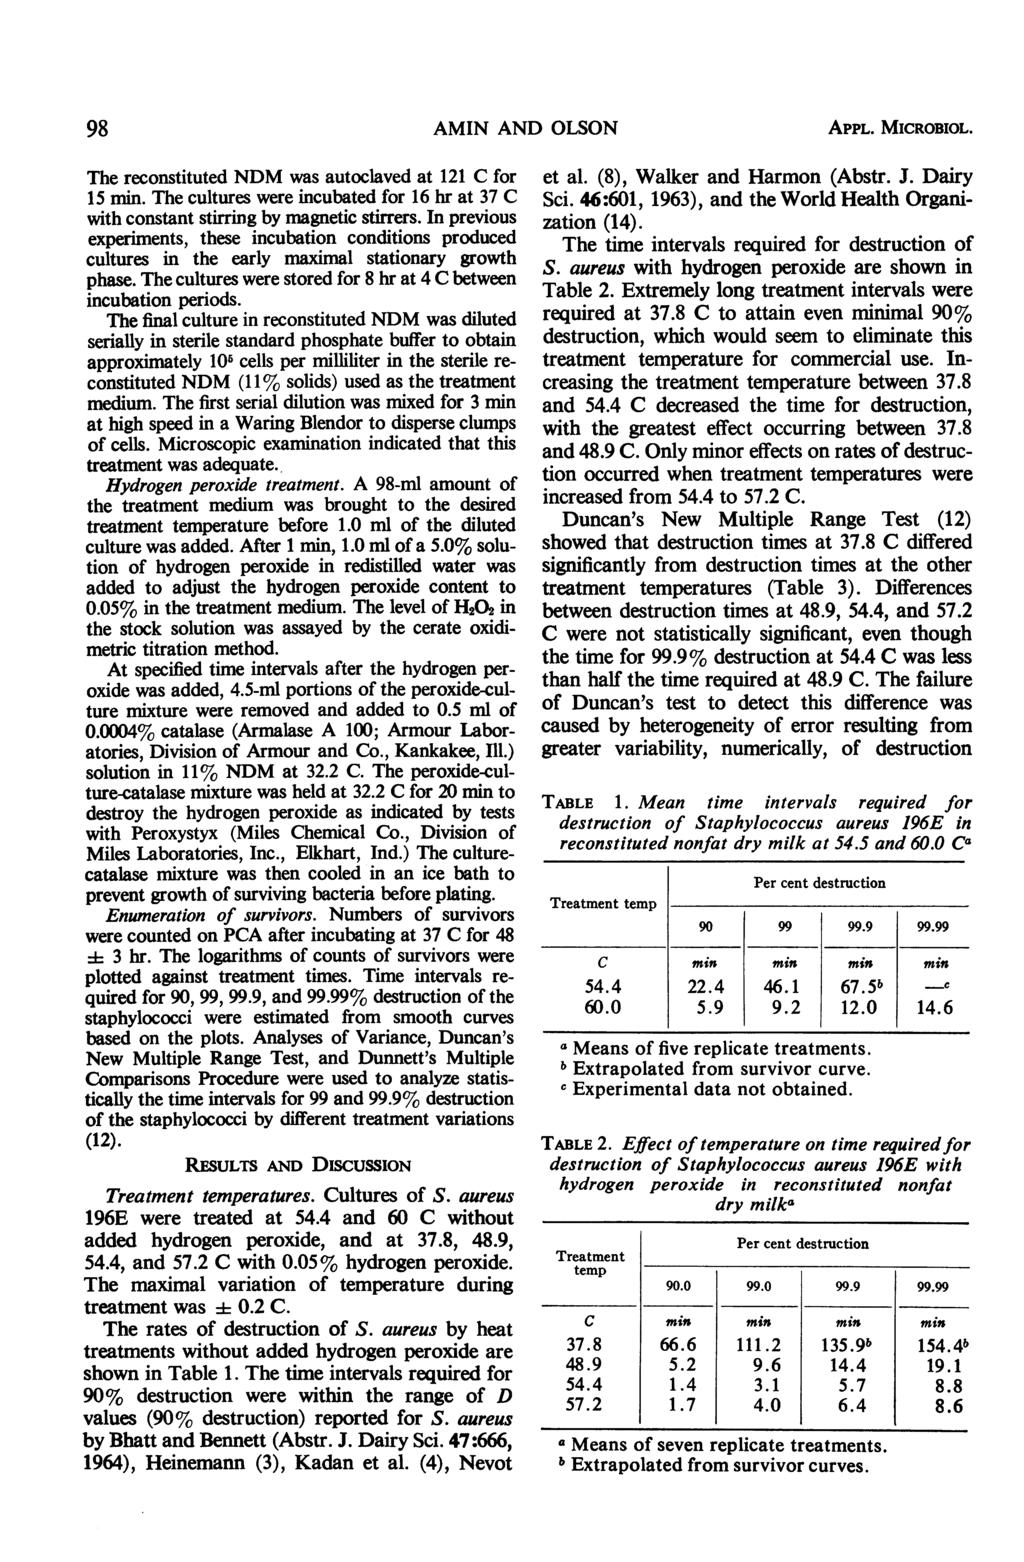 98 AMIN AND OLSON APPL. MICROBIOL. The reconstituted NDM was autoclaved at 121 C for 15 min. The cultures were incubated for 16 hr at 37 C with constant stirring by magnetic stirrers.